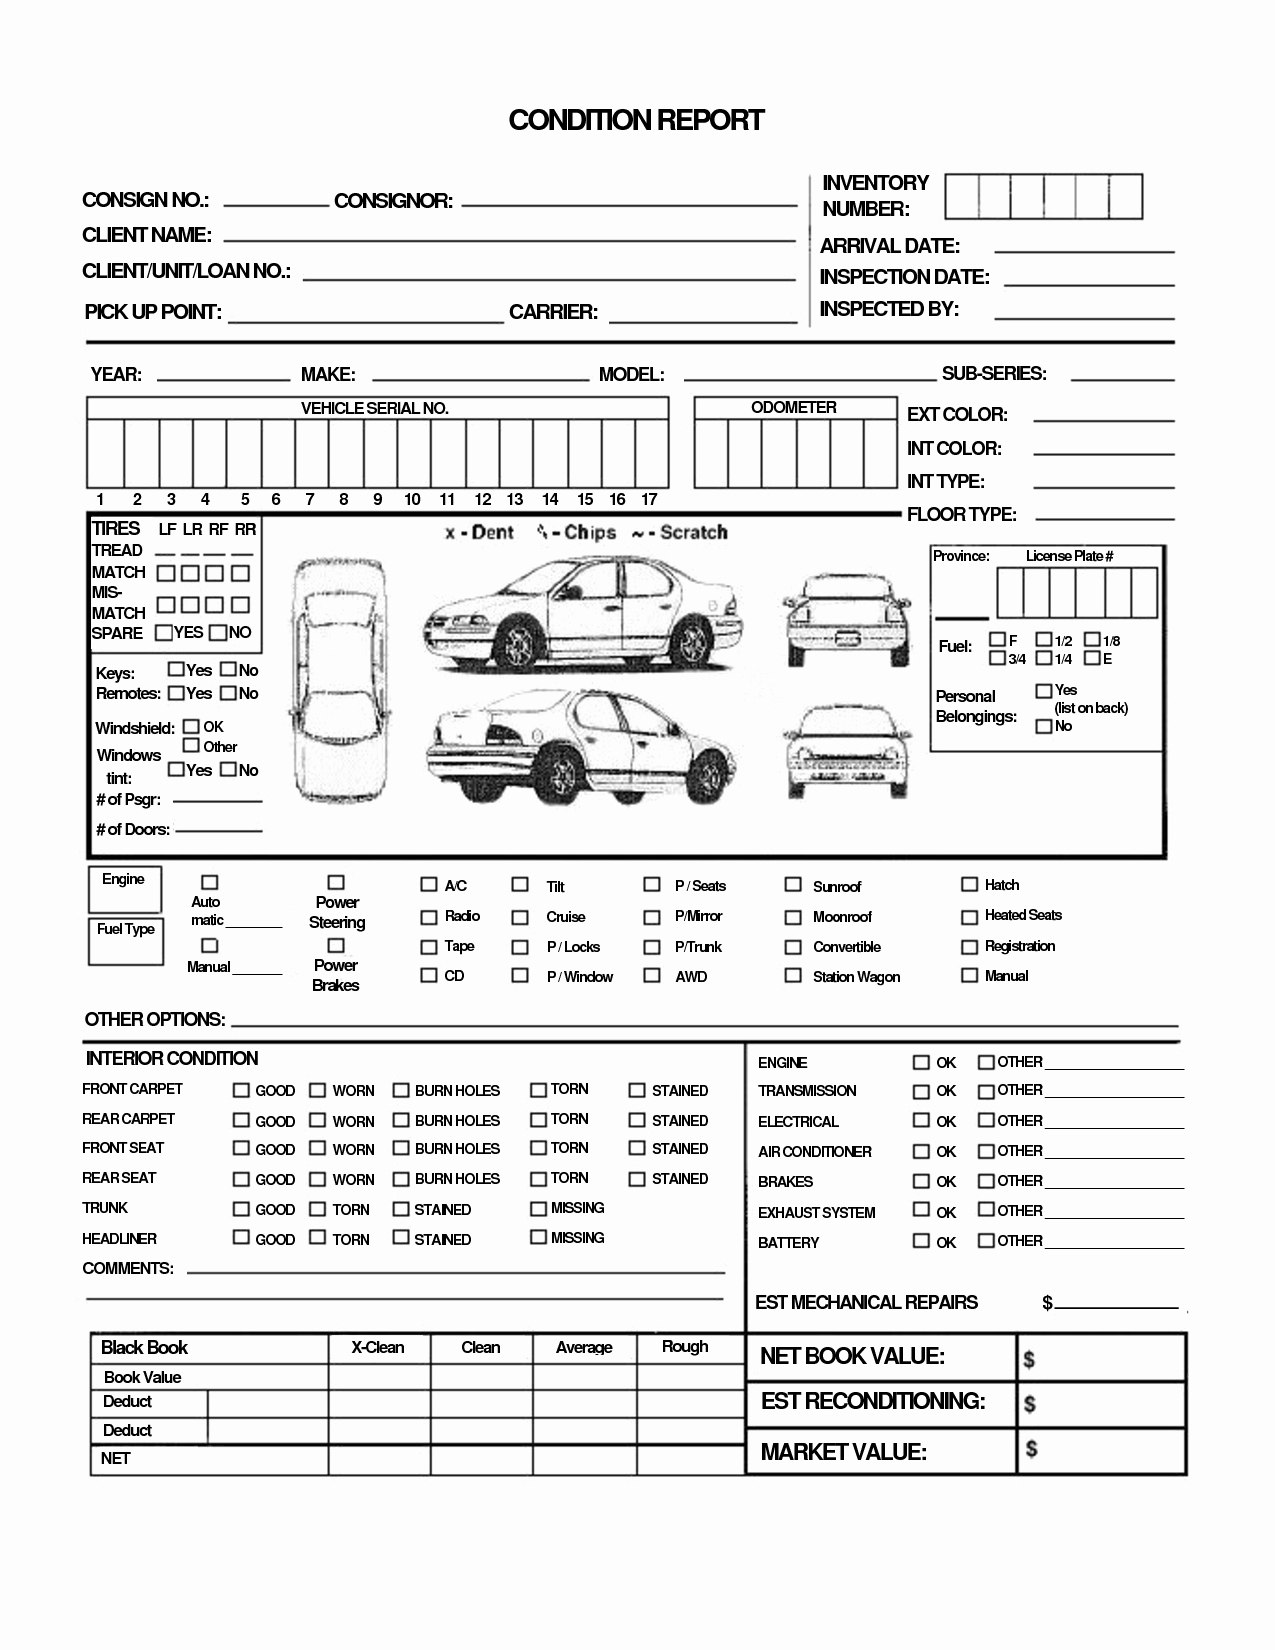 Vehicle Condition Report Template Luxury form Vehicle Condition Report form Vehicle Condition